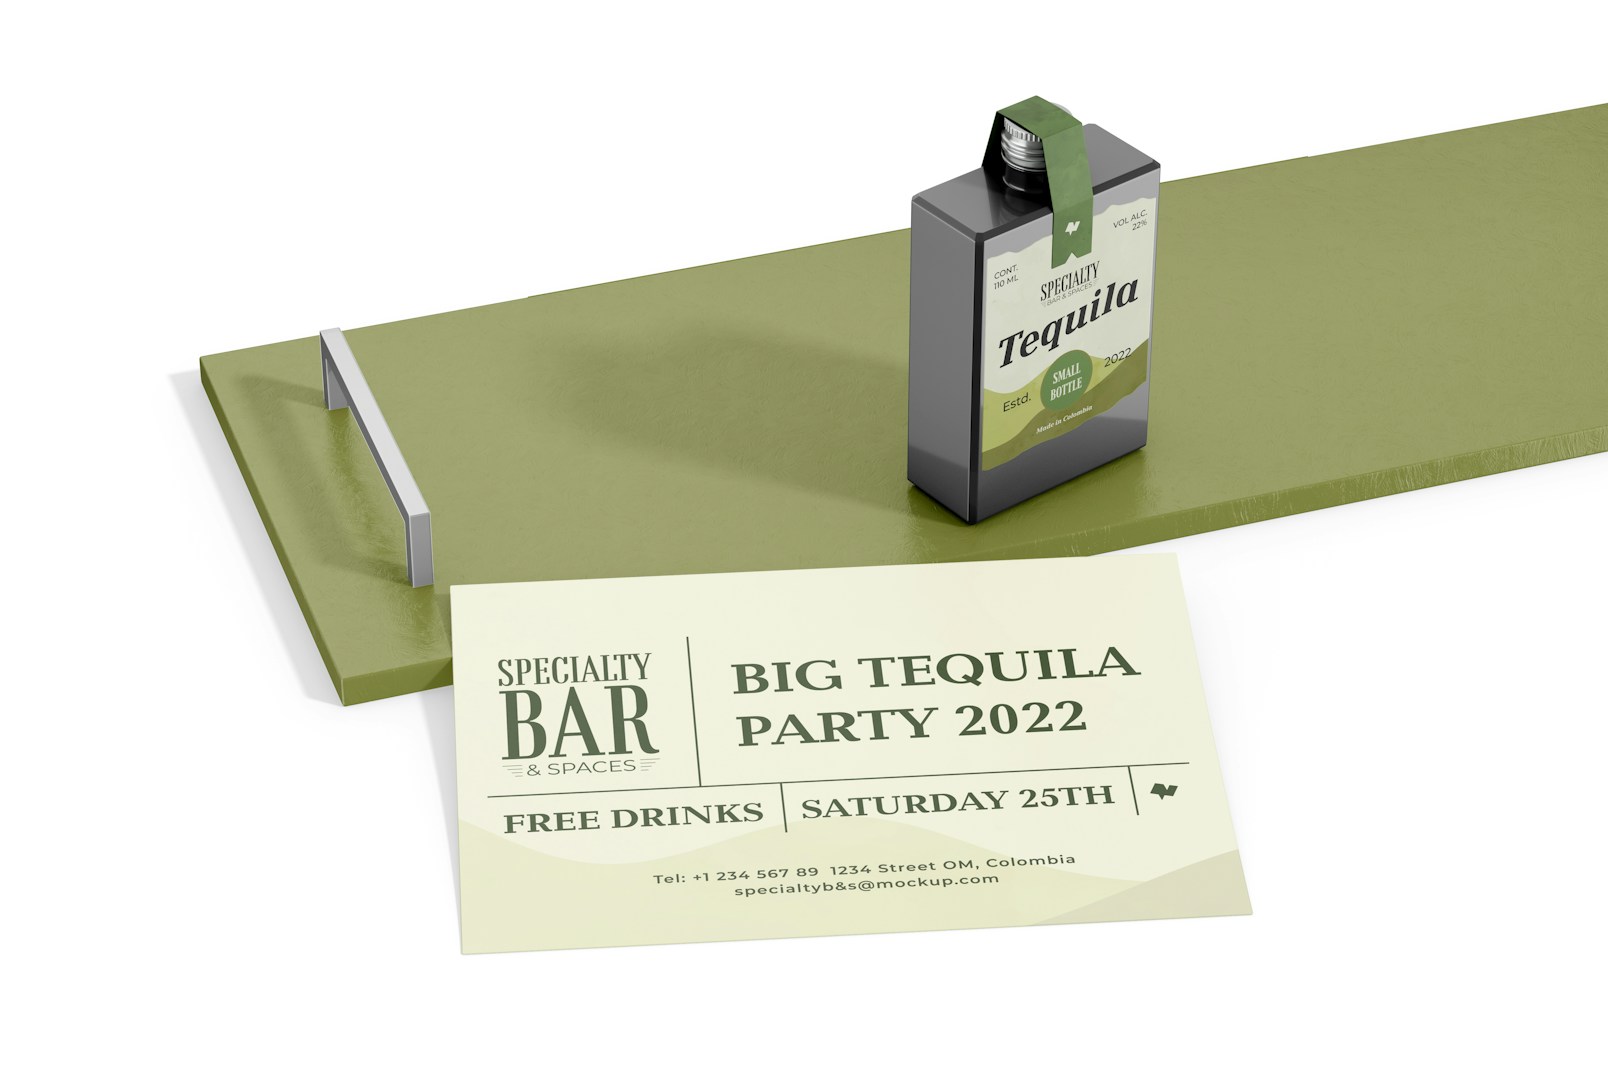 Small Tequila Bottle with Stationery Mockup, on Tray